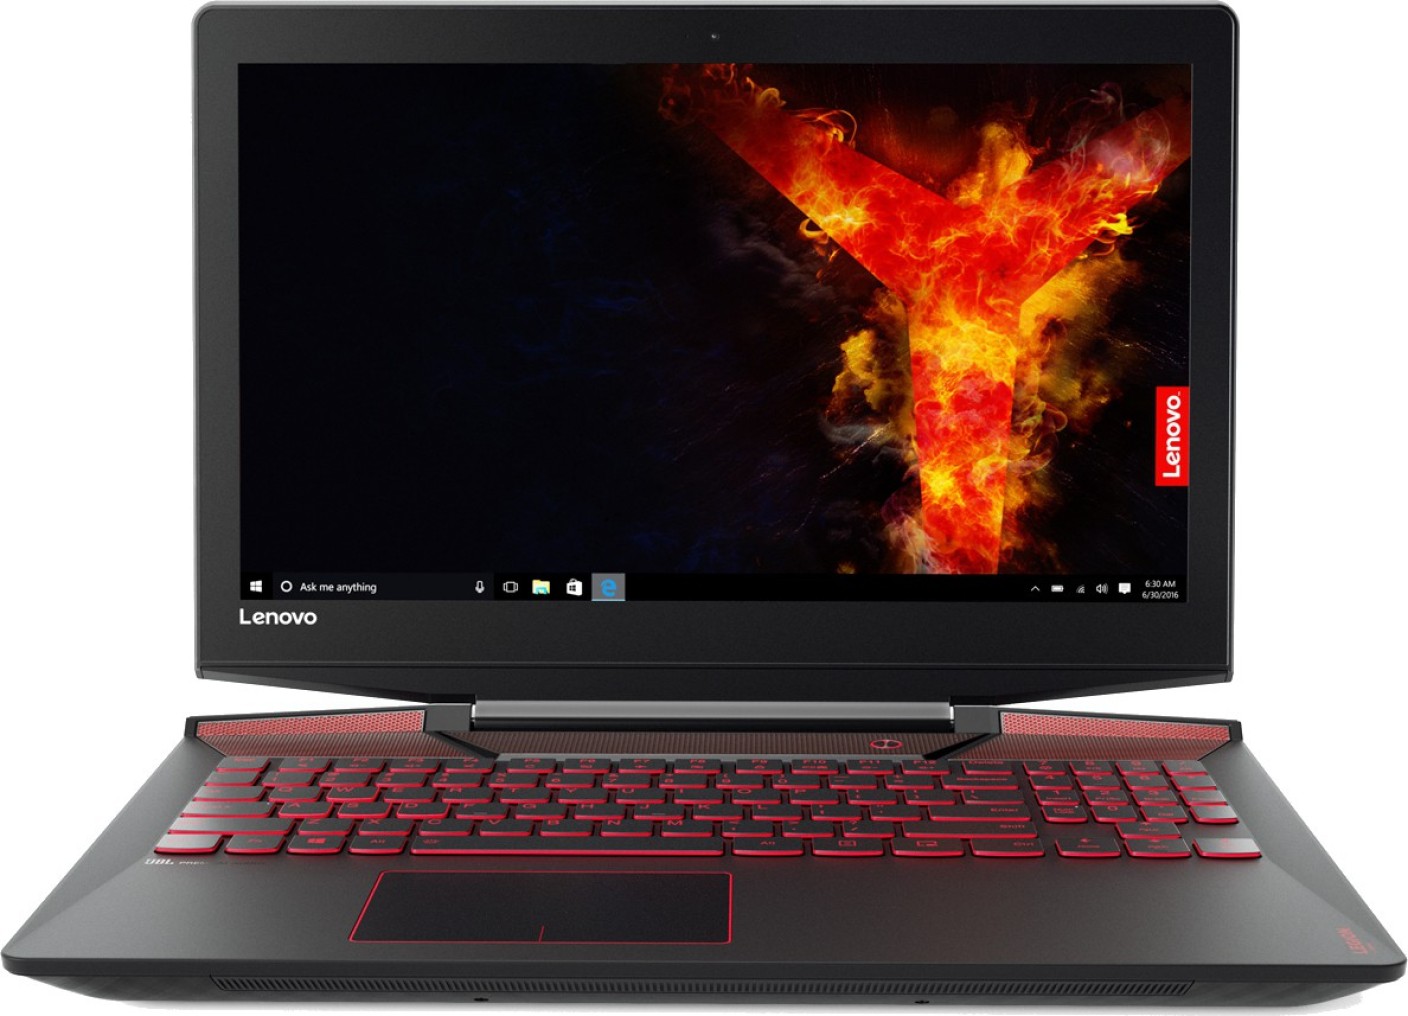 Lenovo Laptop Discount For Students